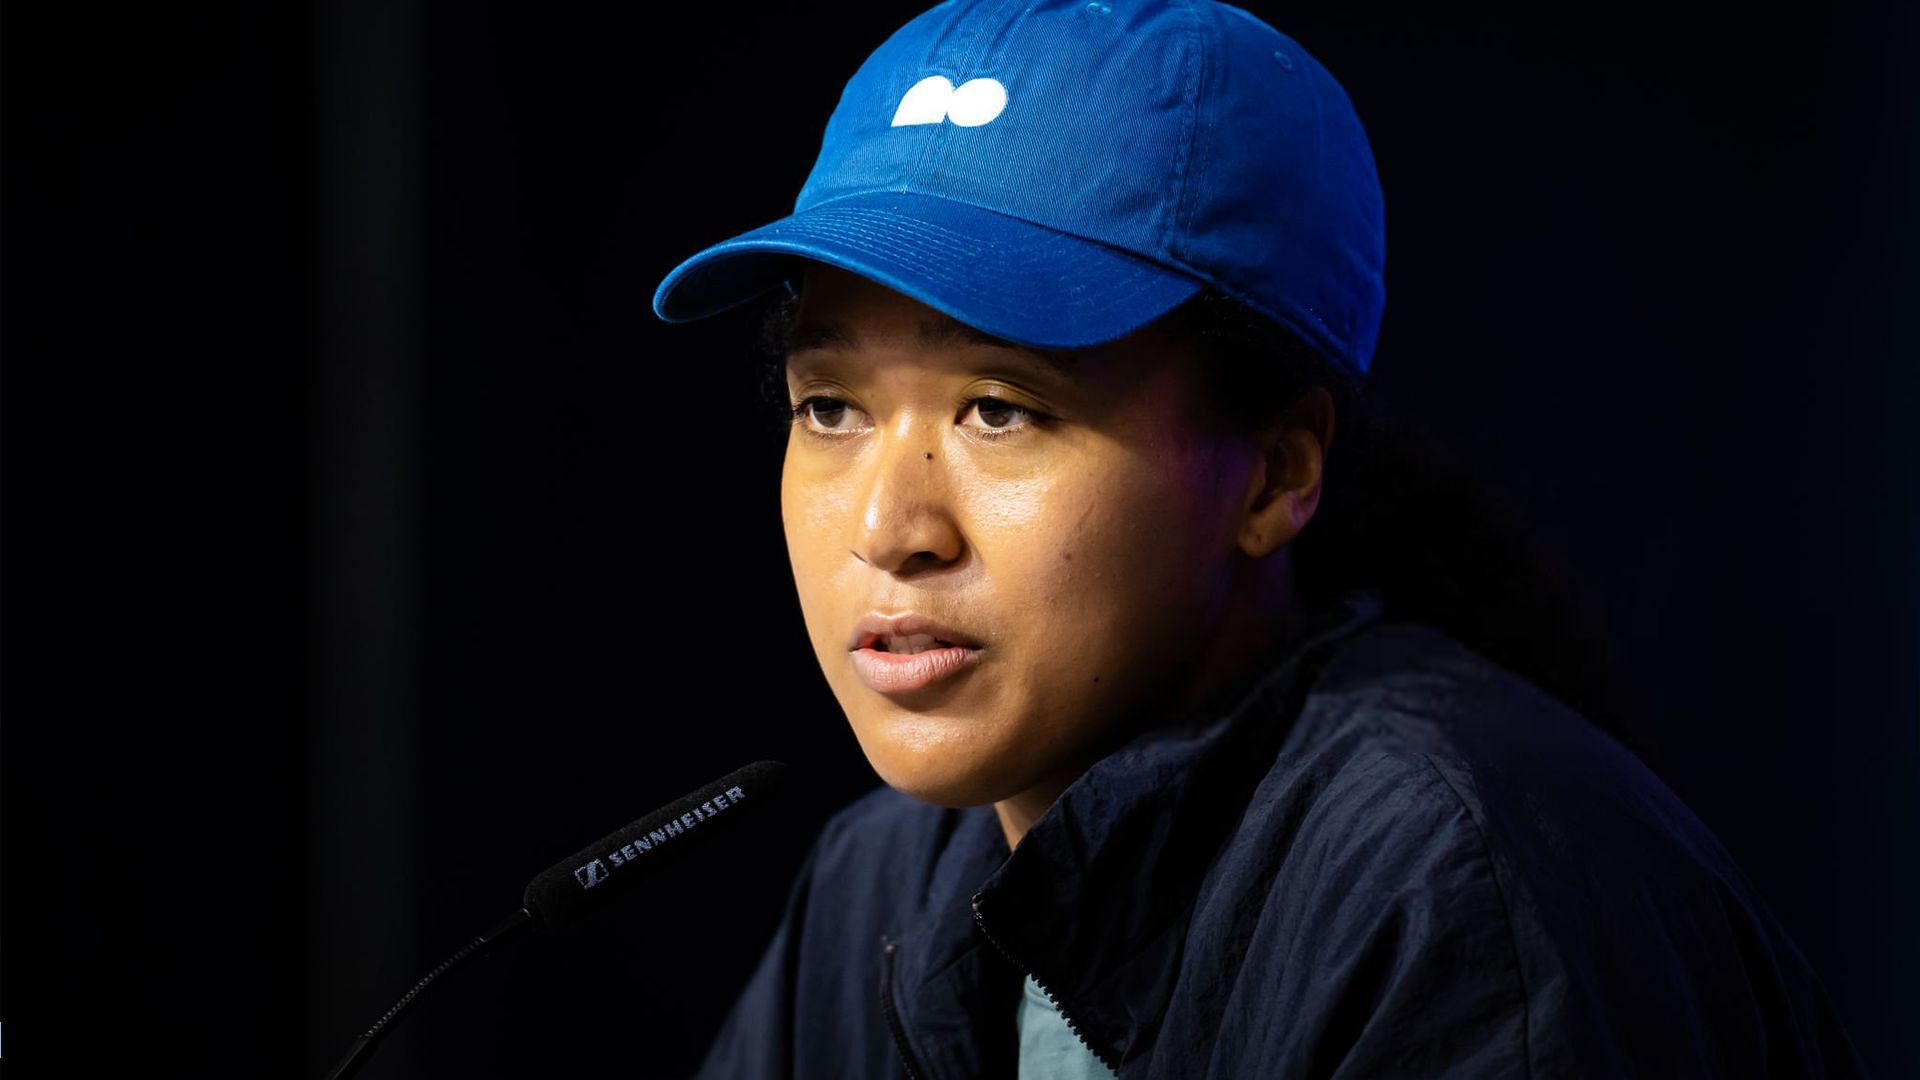 Naomi Osaka lost in the Brisbane second round on Wednesday.